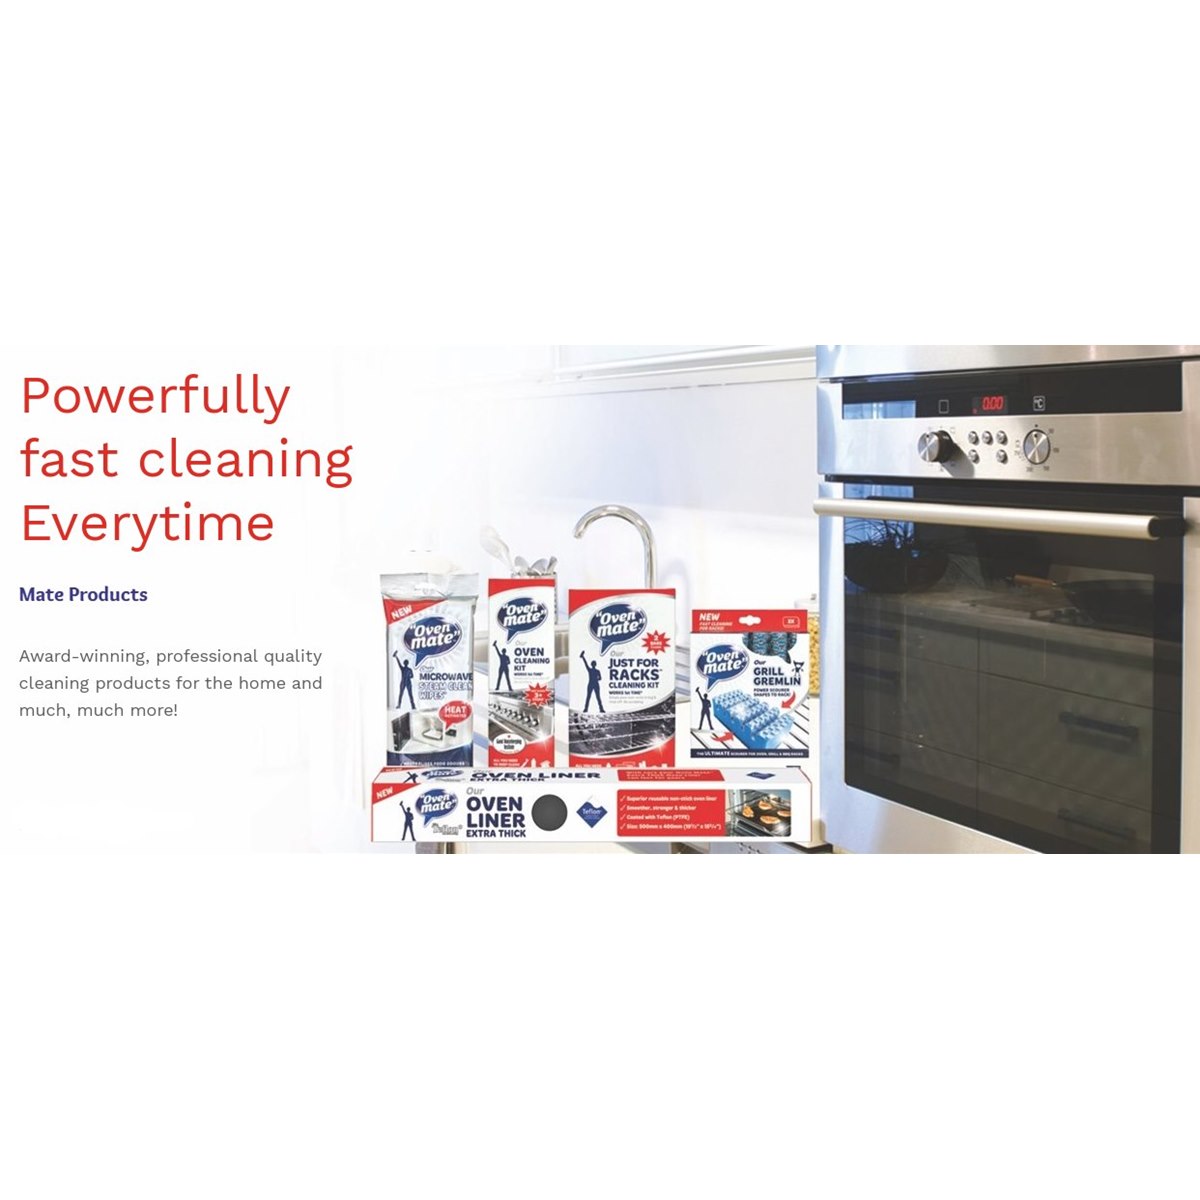 Where to buy Oven Mate Products